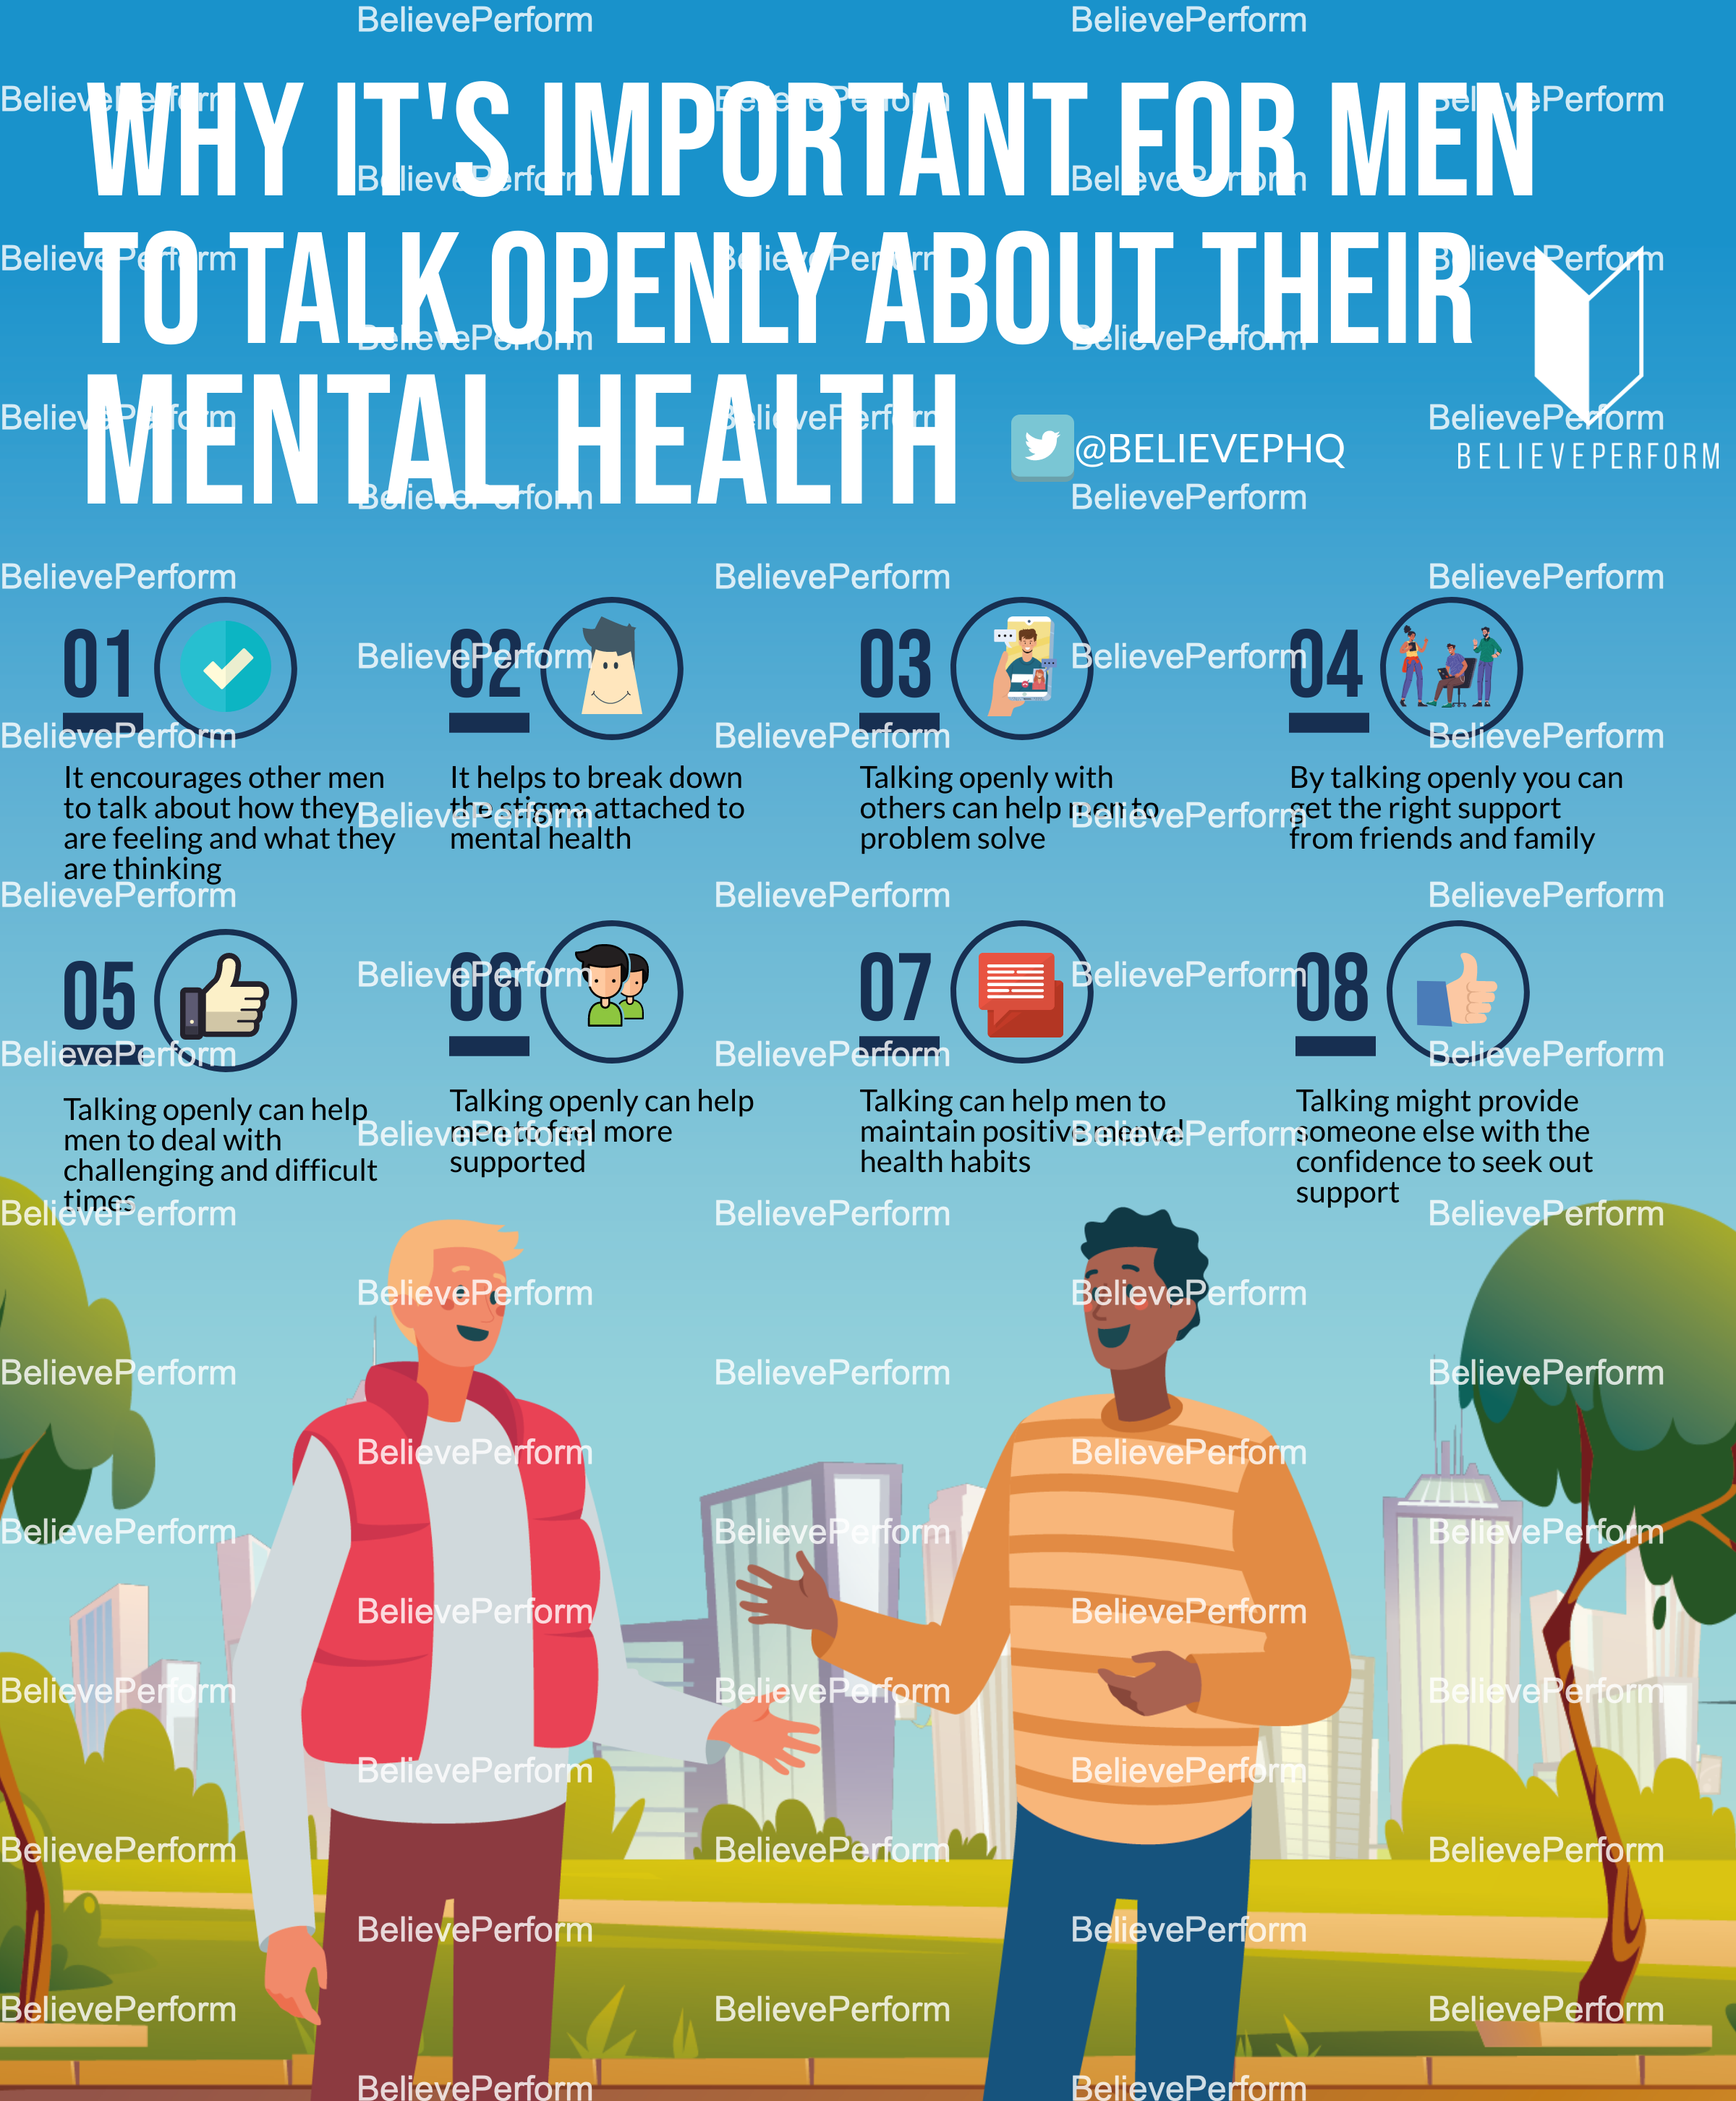 Why it's important for men to talk openly about their mental health